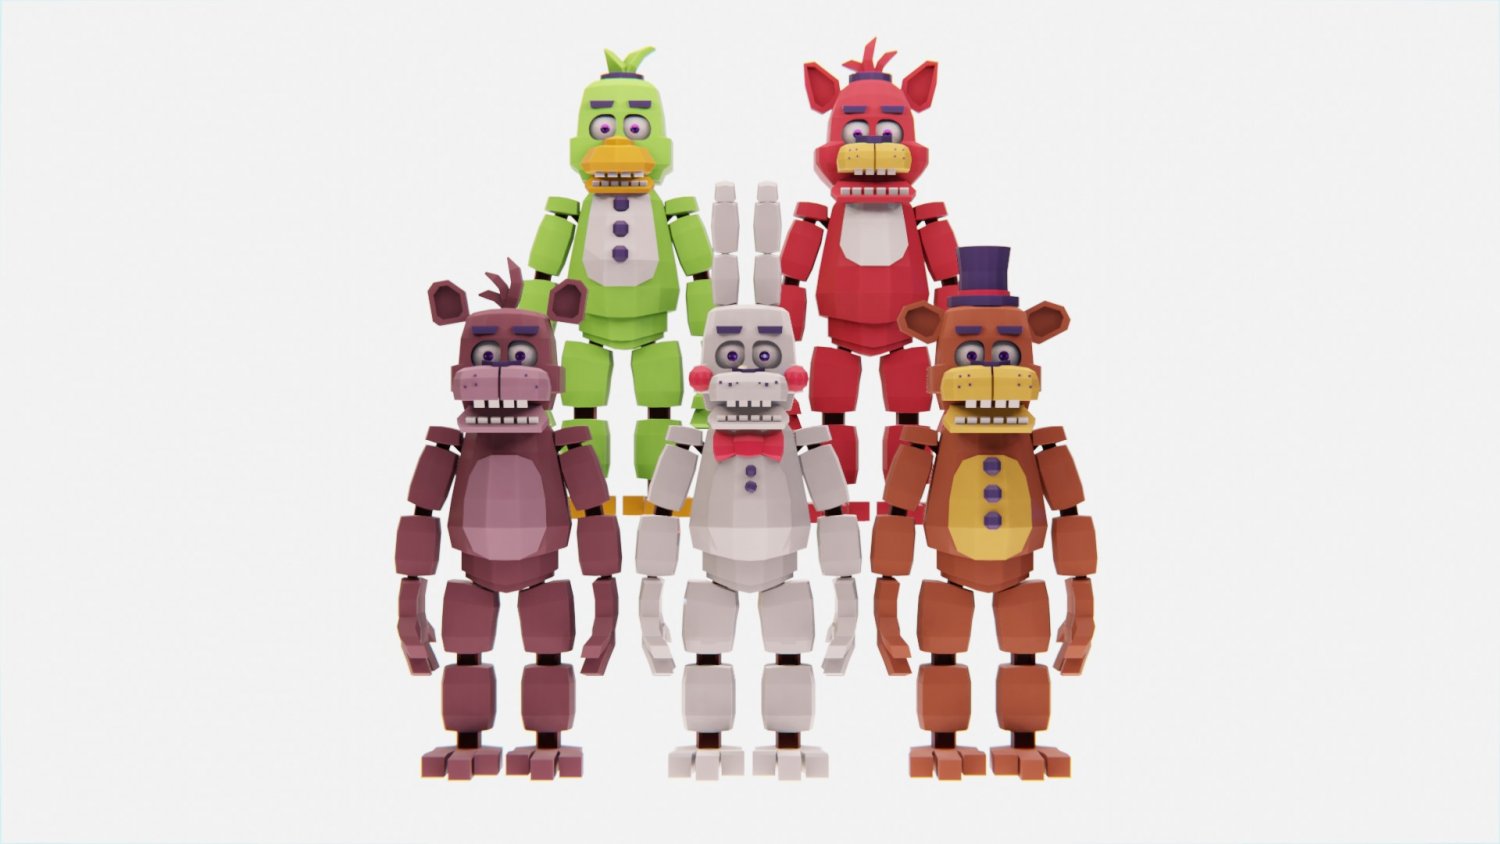 Five Nights At Freddy's Animatronics Character Art Boy's Red T